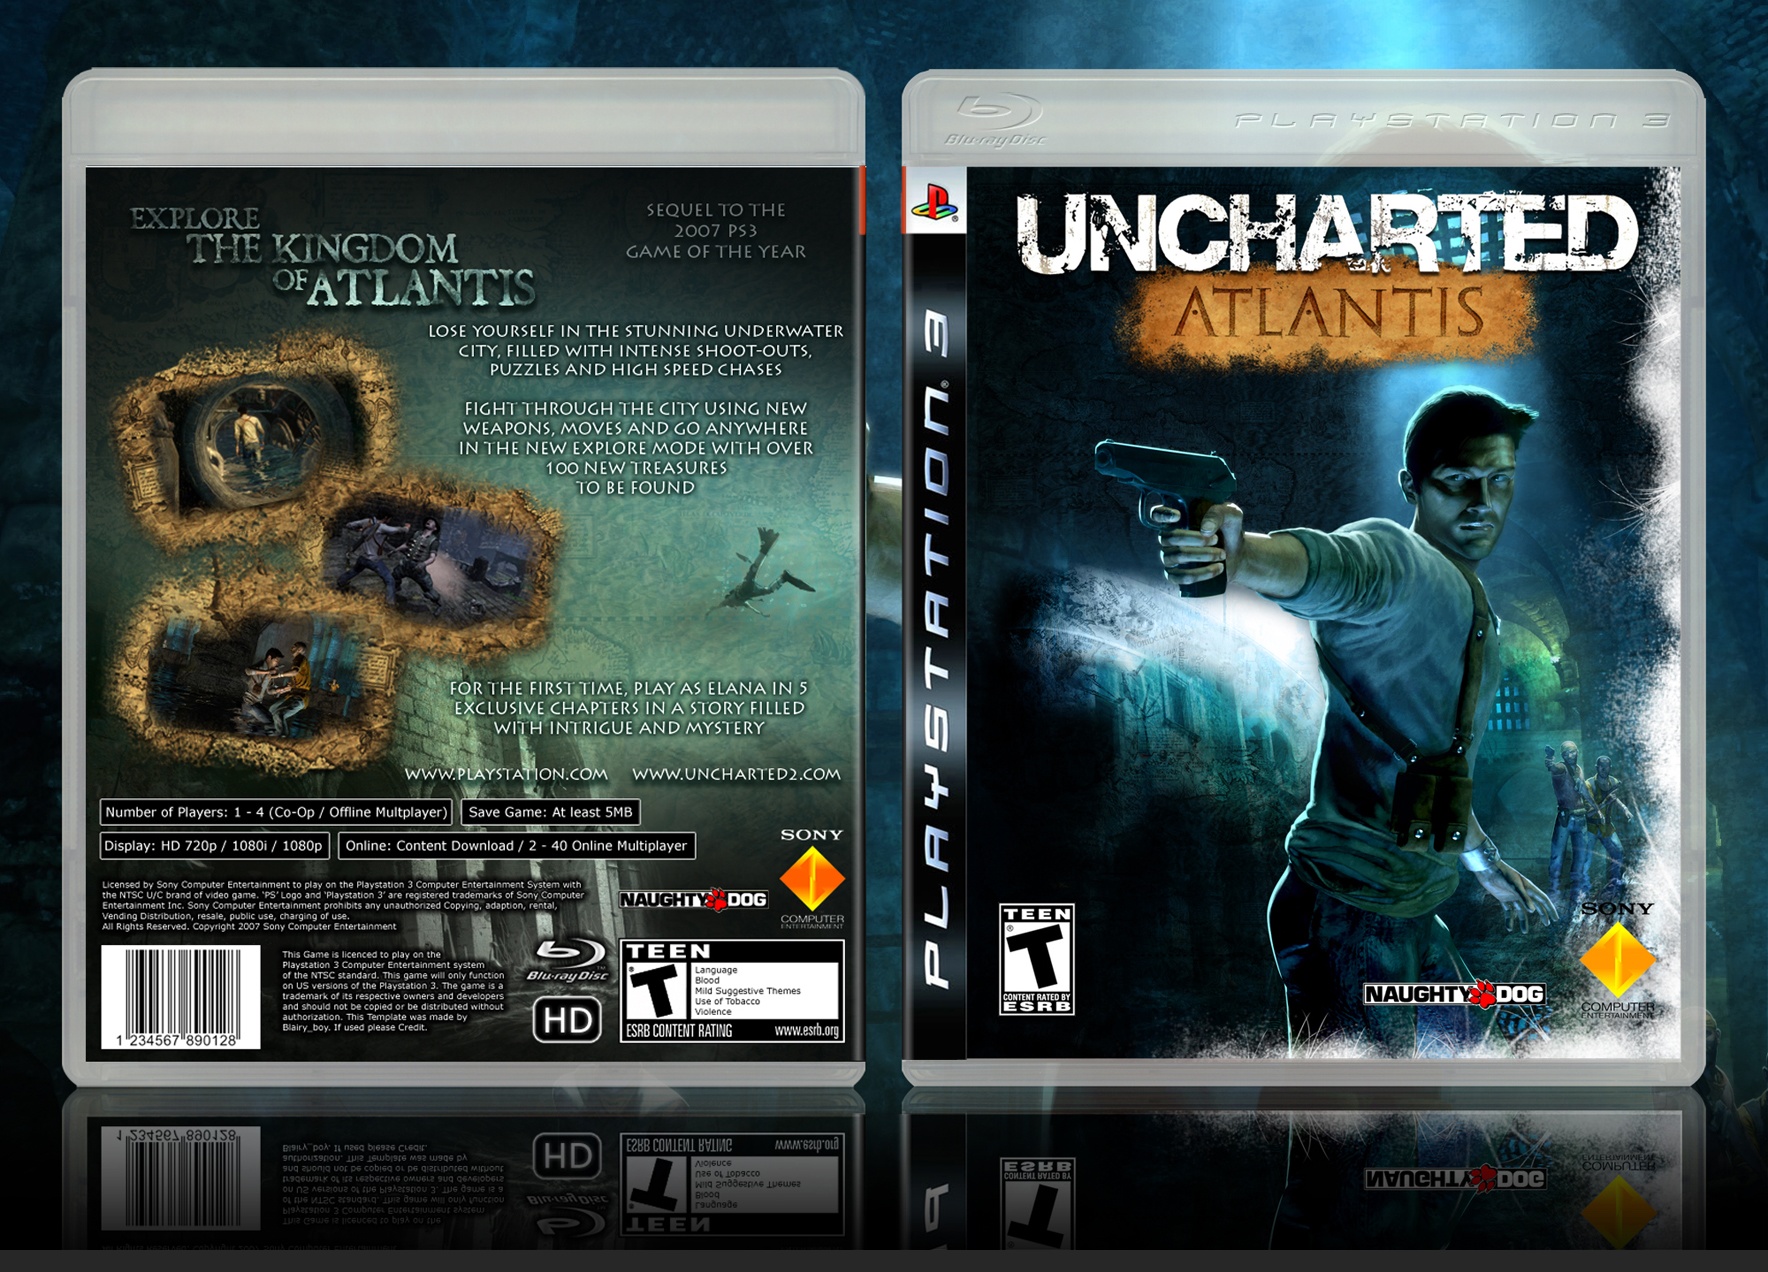 Uncharted: Atlantis box cover